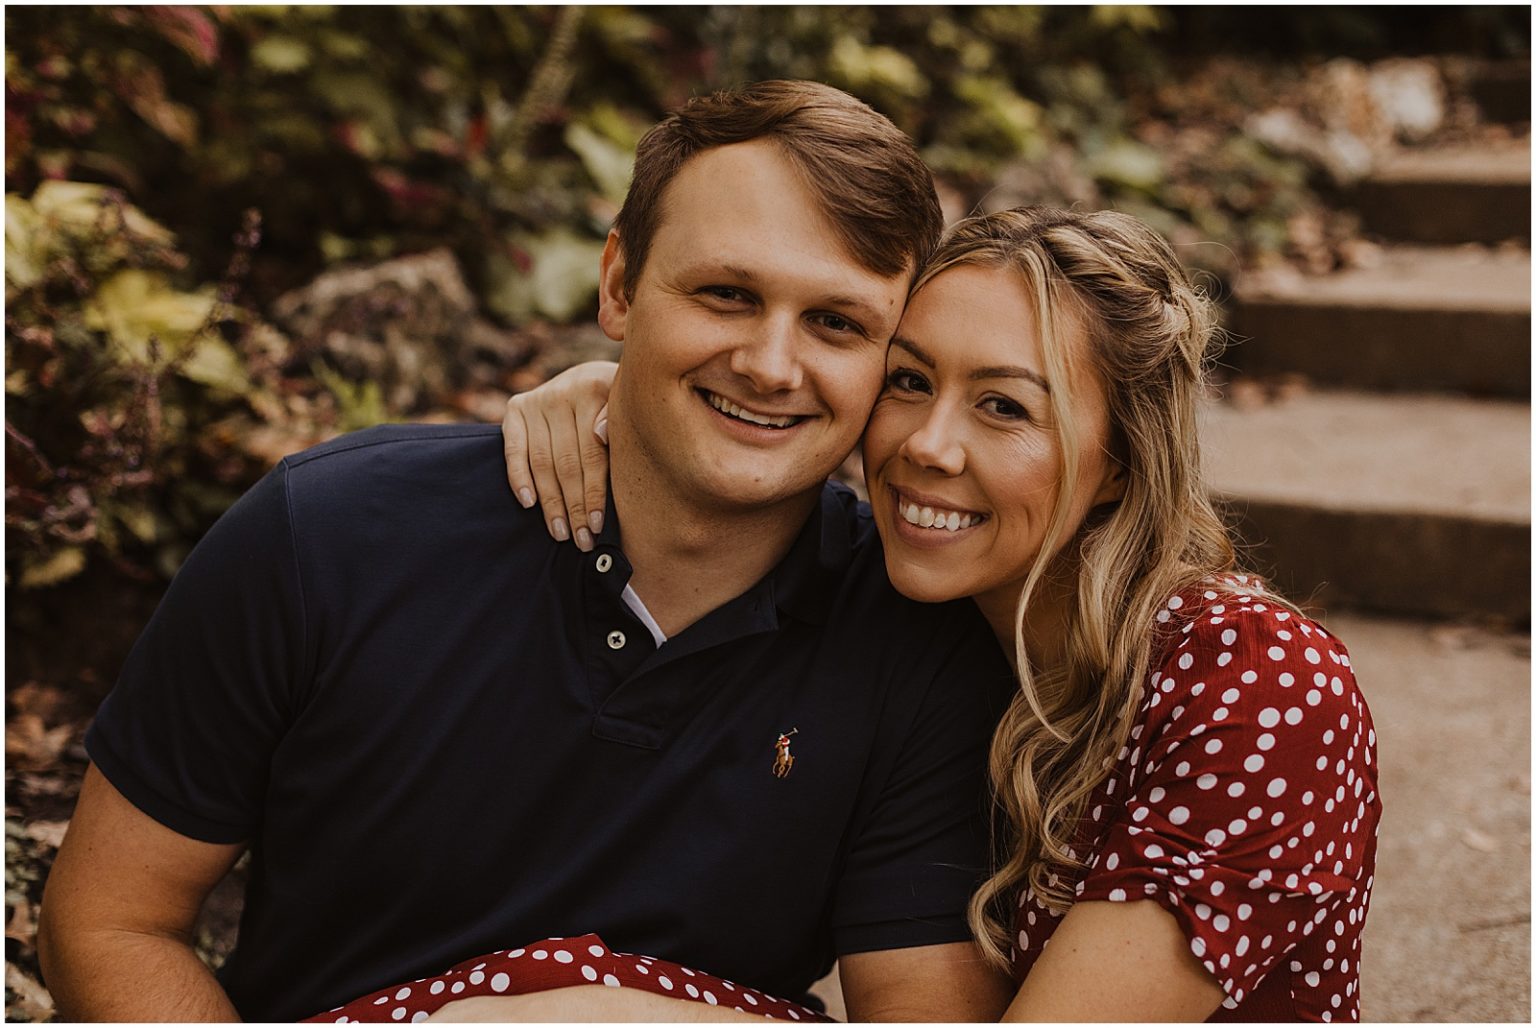 Lafayette Square Engagement Session | Emmie + Trey | Abby Rose Photo